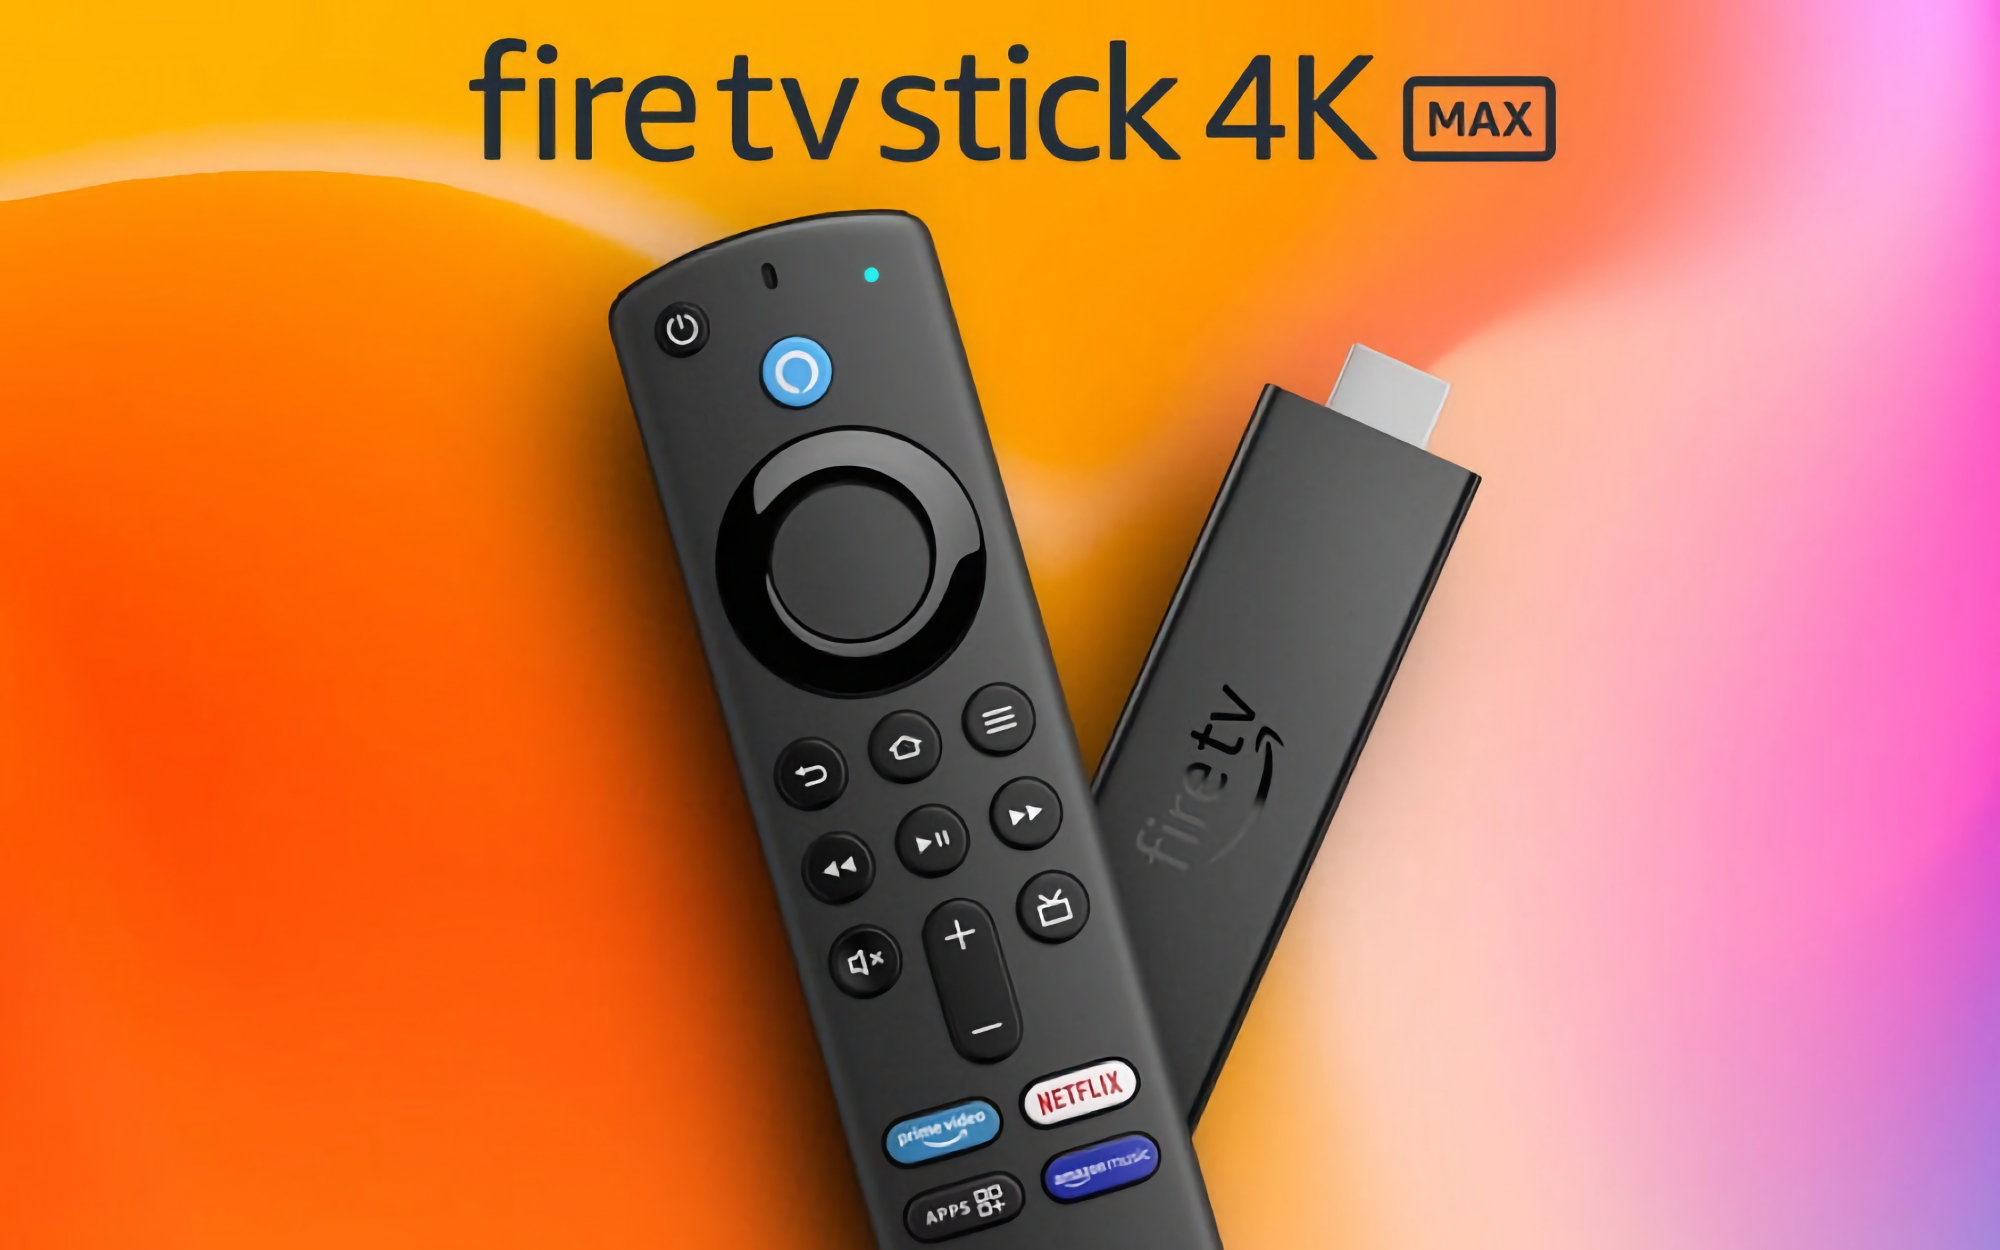 Amazon sells Fire TV Stick 4K Max with Alexa and Wi-Fi 6 for $34.99 ($20 off)